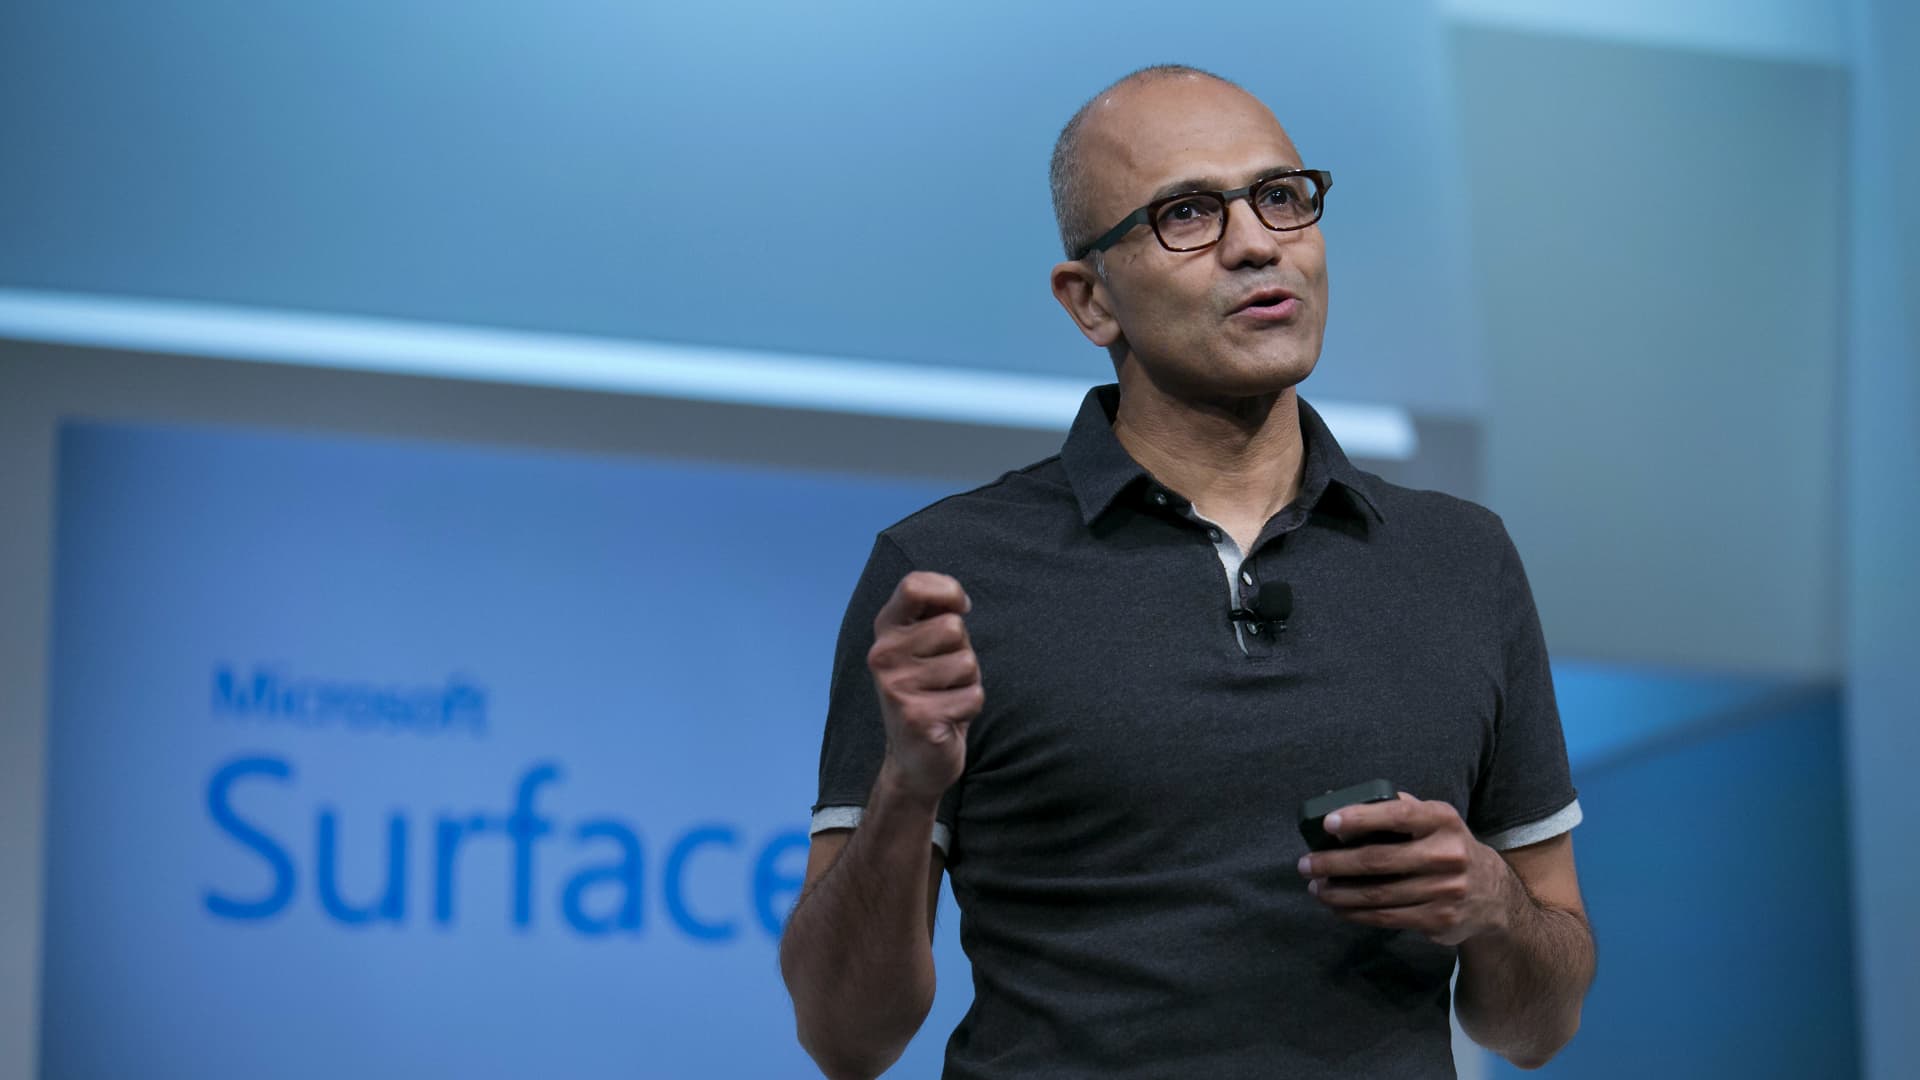 Satya Nadella, chief executive officer of Microsoft Corp., speaks during the unveiling of the Surface Pro 3 at an event in New York on May 20, 2014.